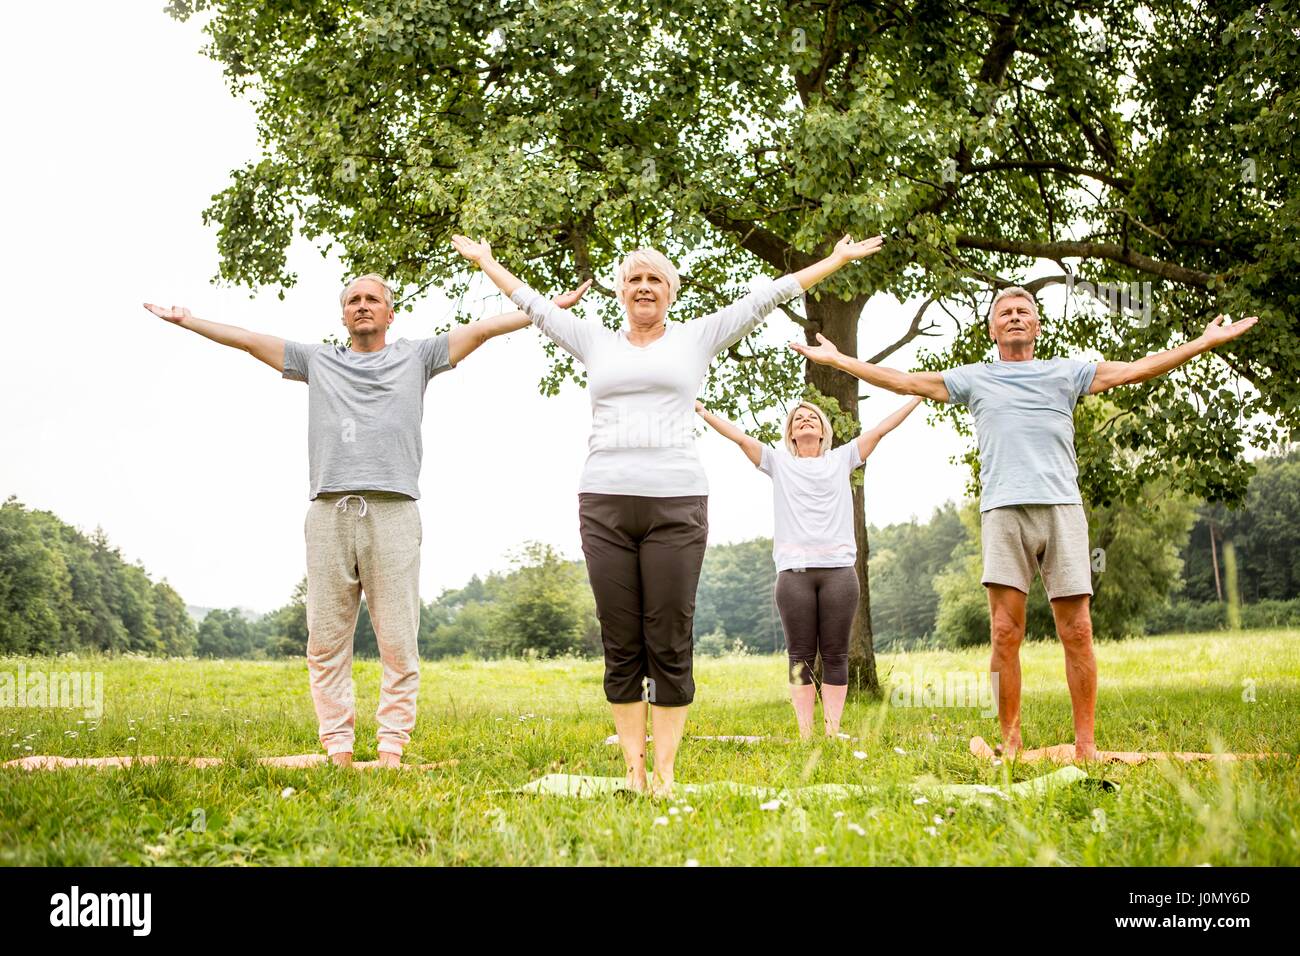 Four people doing yoga in field. Stock Photo